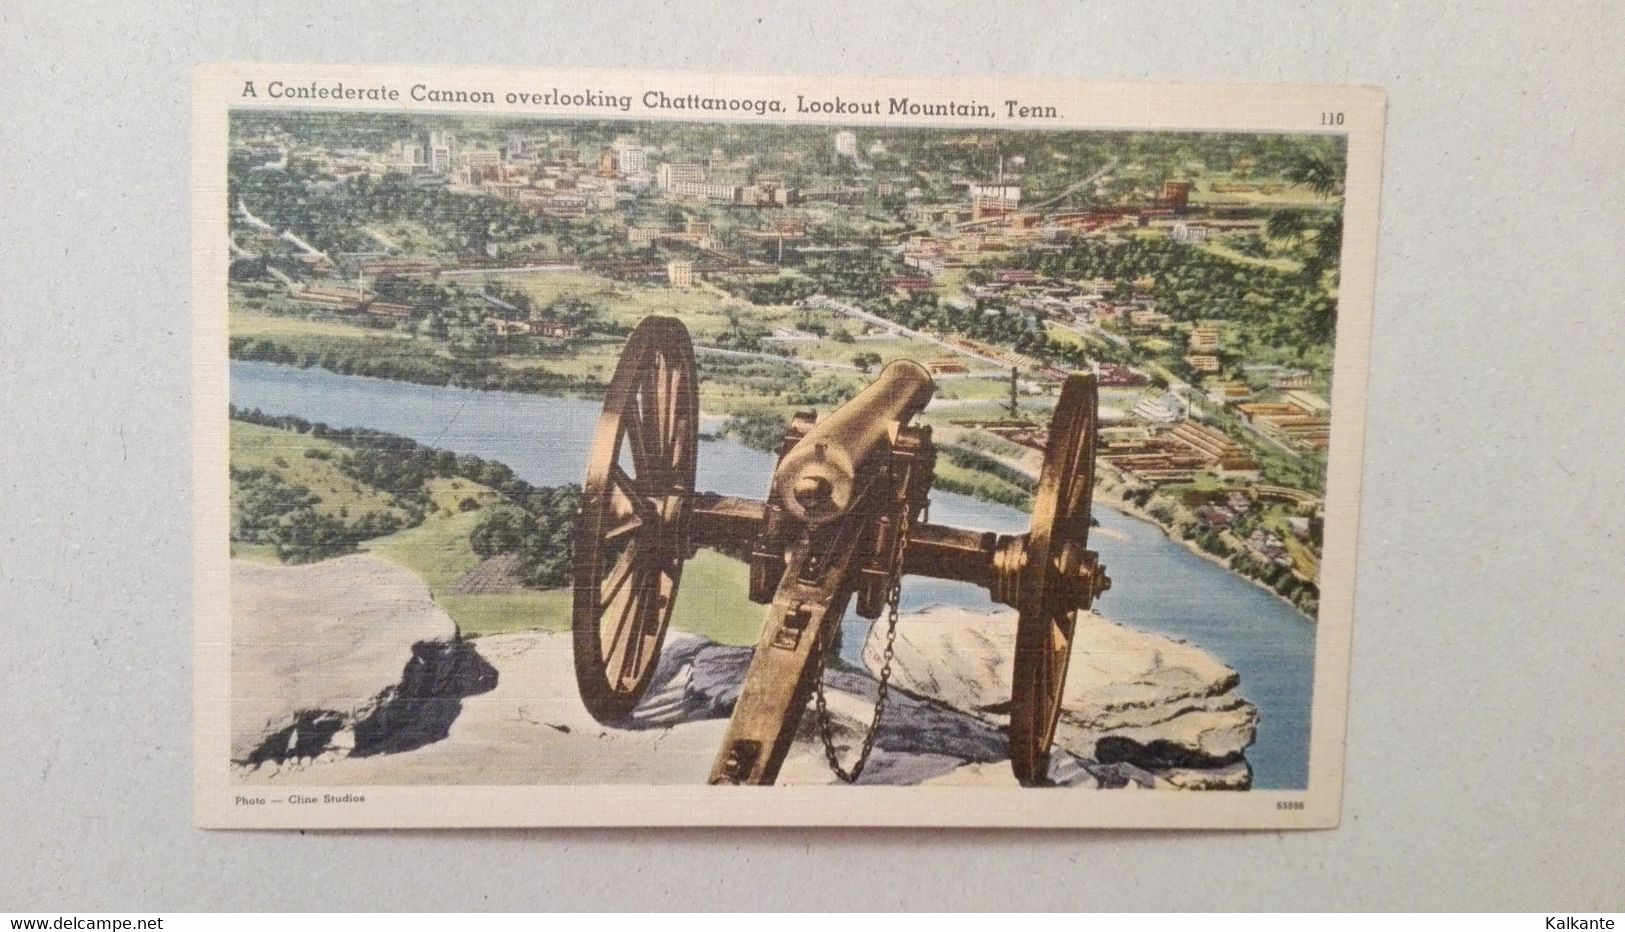 [TENNESSEE] - CHATTANOOGA - Cannon Overlooking Chattanooga - Chattanooga